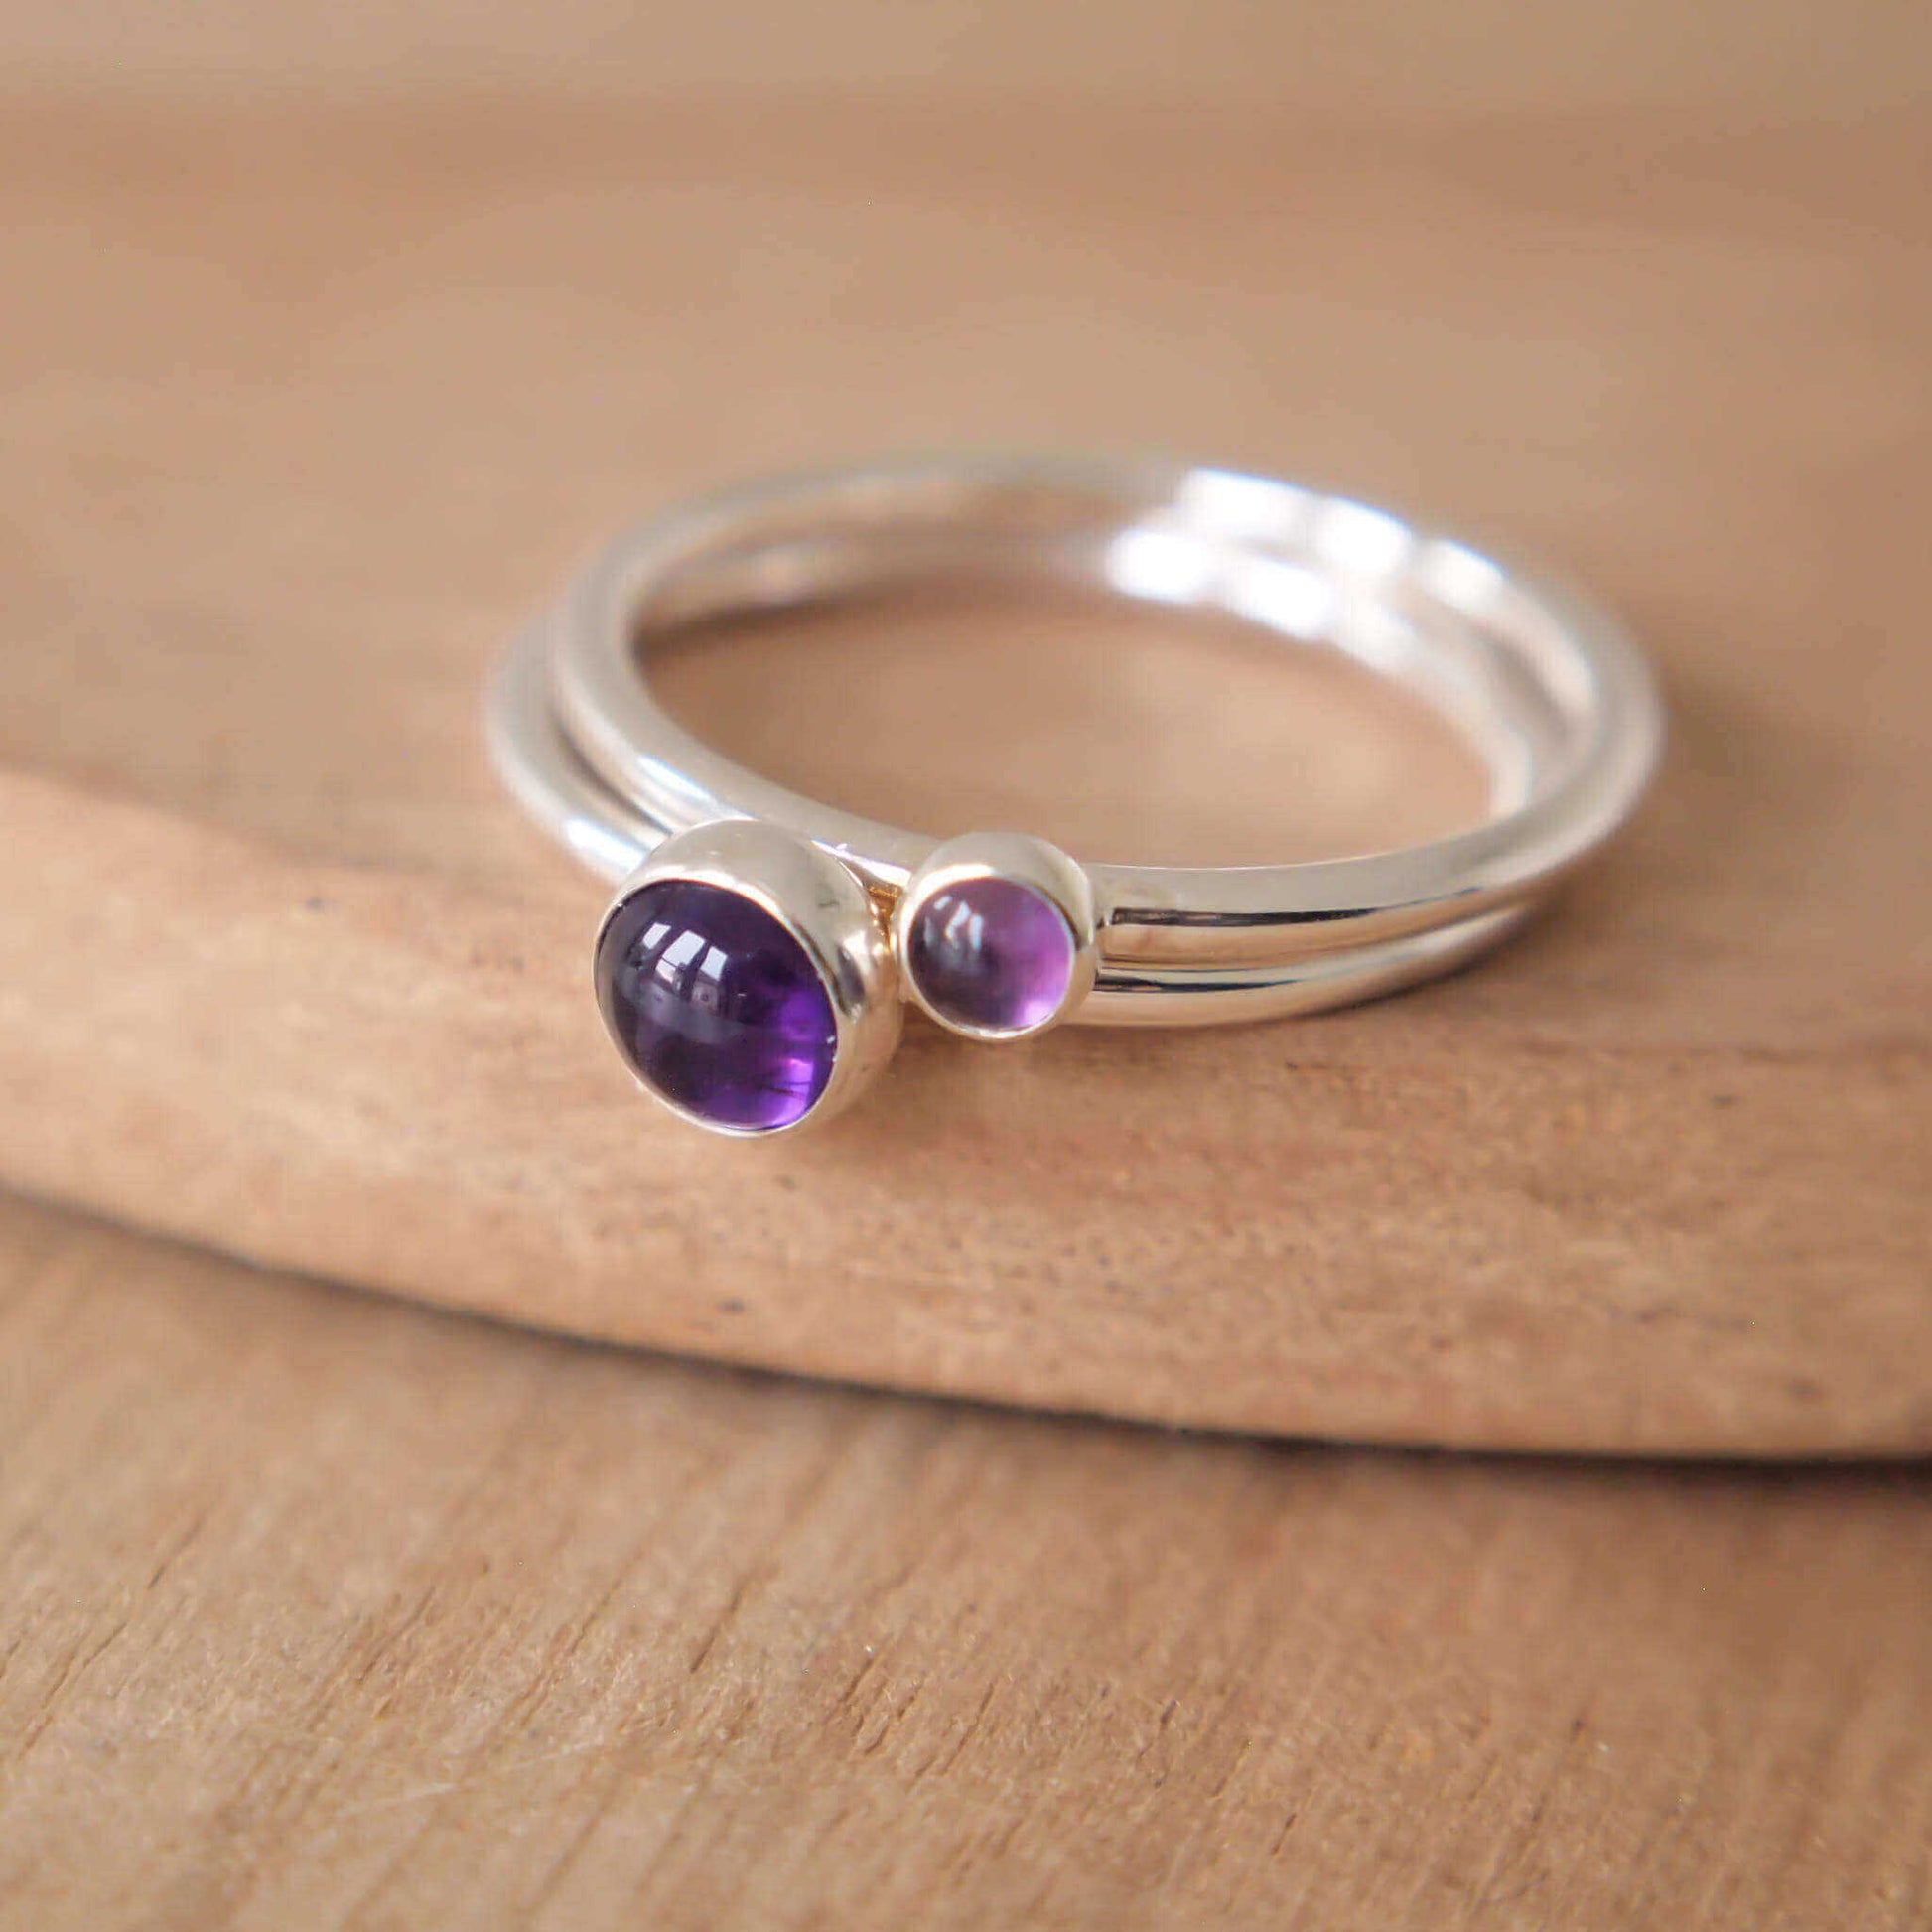 Purple amethyst and silver two ring set in Sterling silver with 5mm and 3mm round cabochon gemstones. Handmade in Edinburgh by maram jewellery